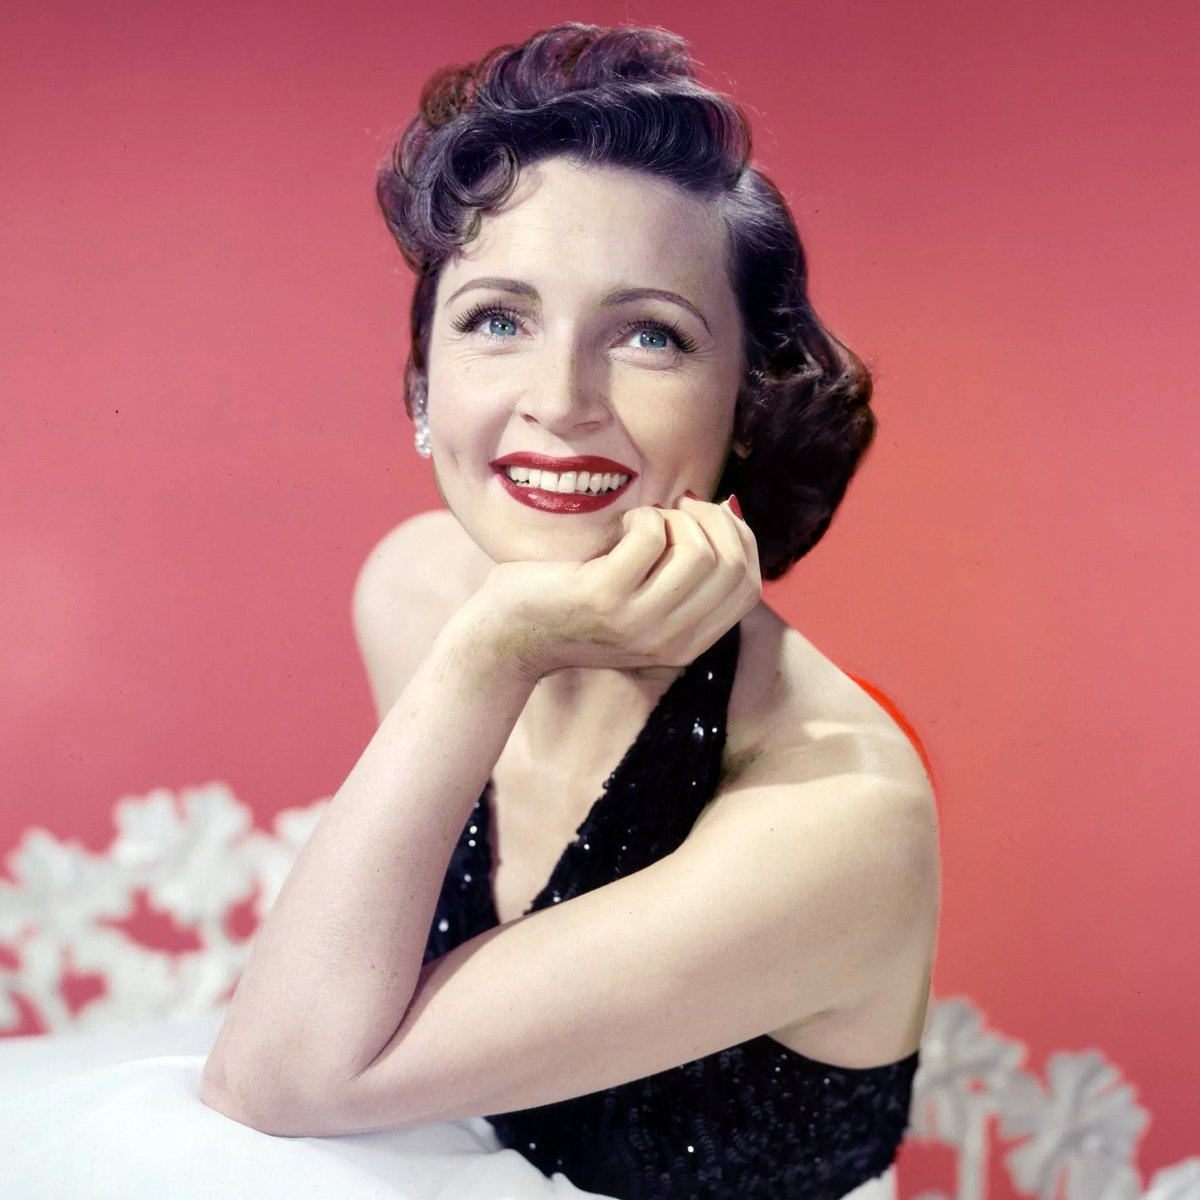 #GGACPattentionmustbepaid Team #GGACP pays tribute to the life and career of the late actress and comedian Betty White, #BOTD in 1922! What is YOUR favorite White role?! @Franksantopadre @RealGilbert